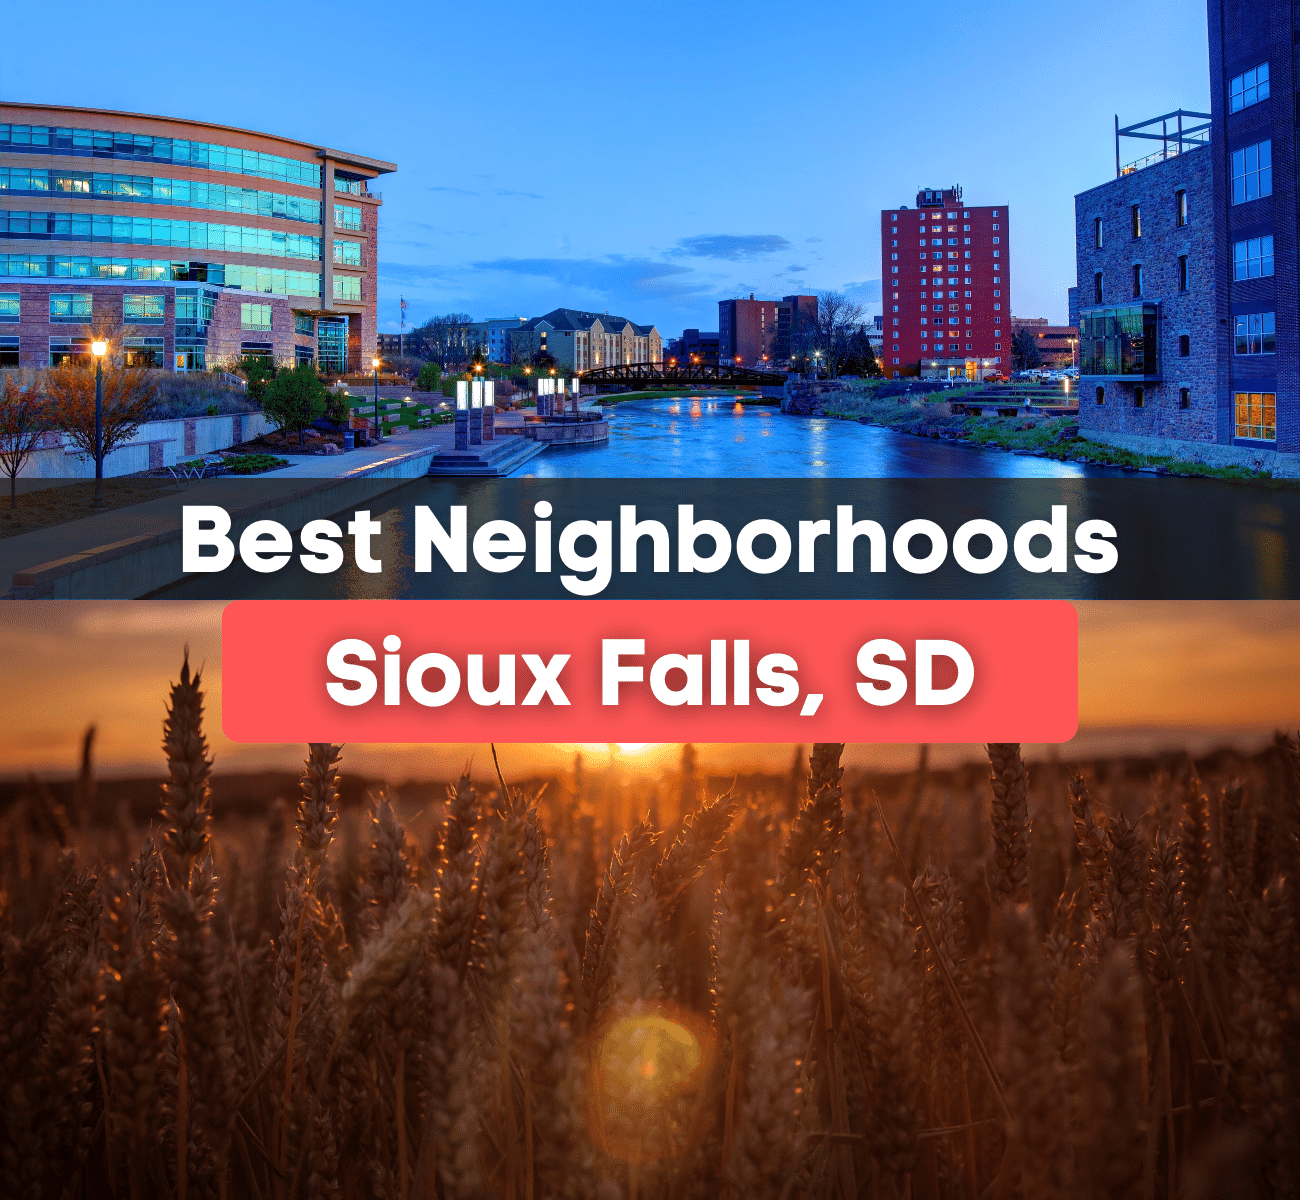 Urban skyline and downtown district of Sioux Falls, South Dakota 